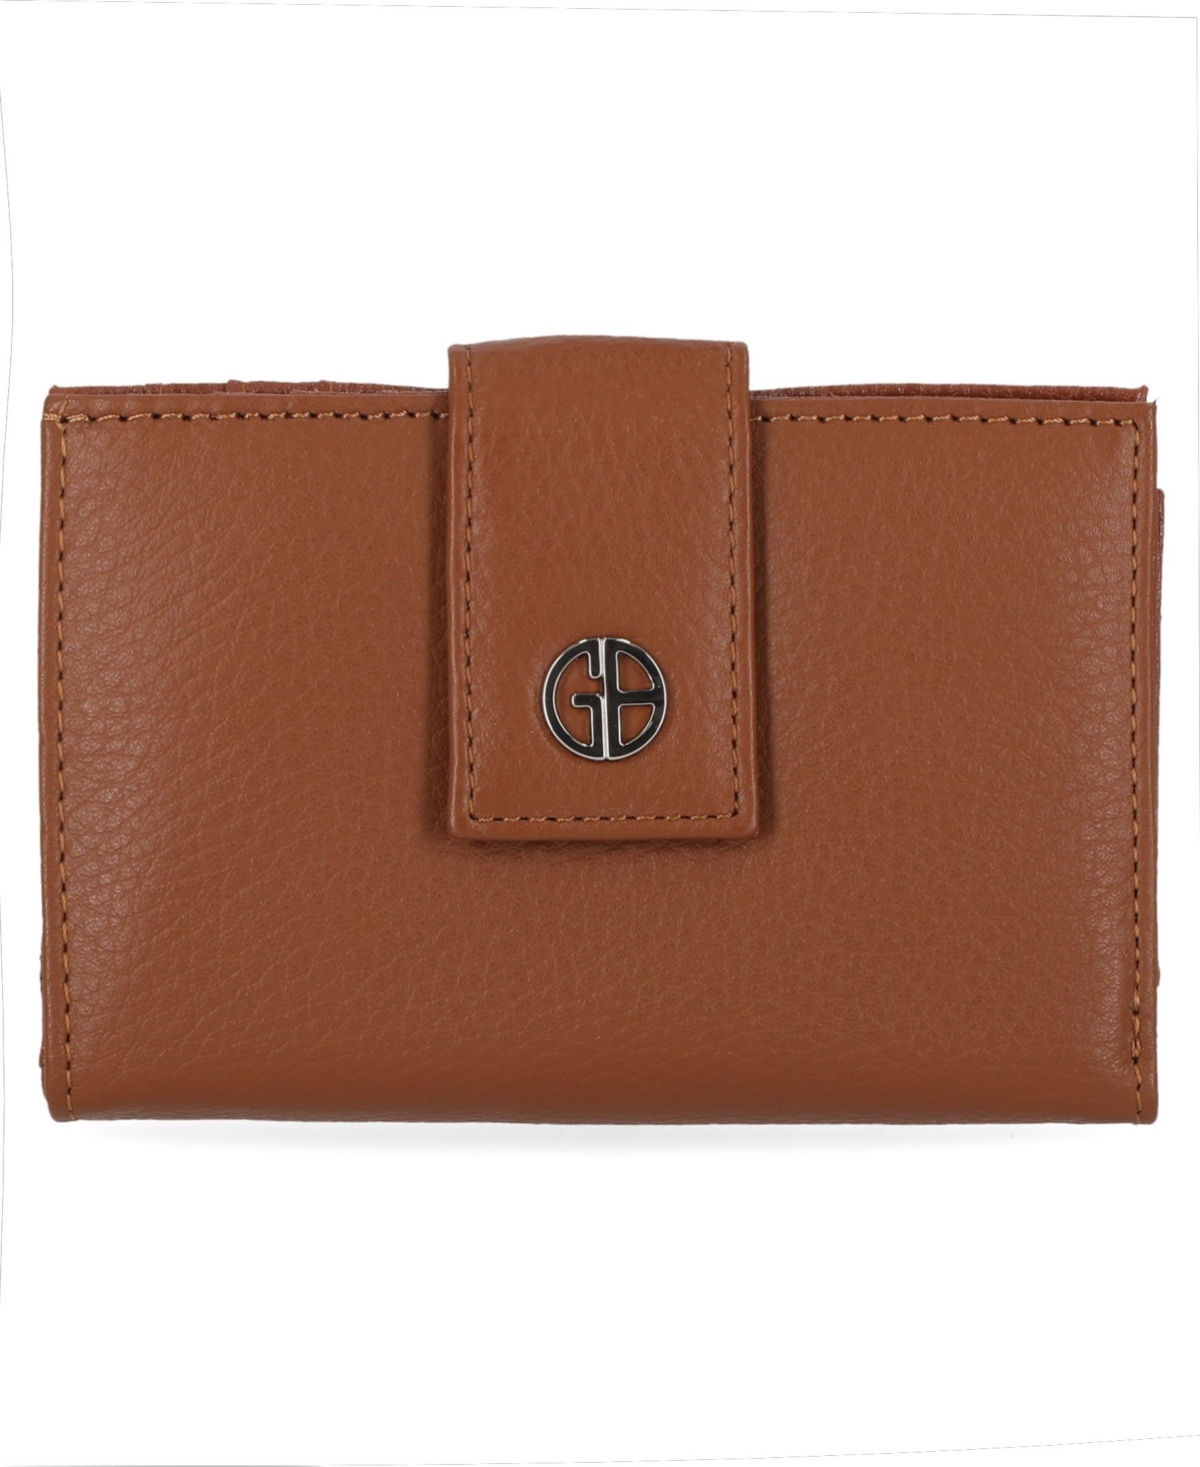 Giani Bernini Framed Indexer Leather Wallet, Created For Macy's In Cognac,silver